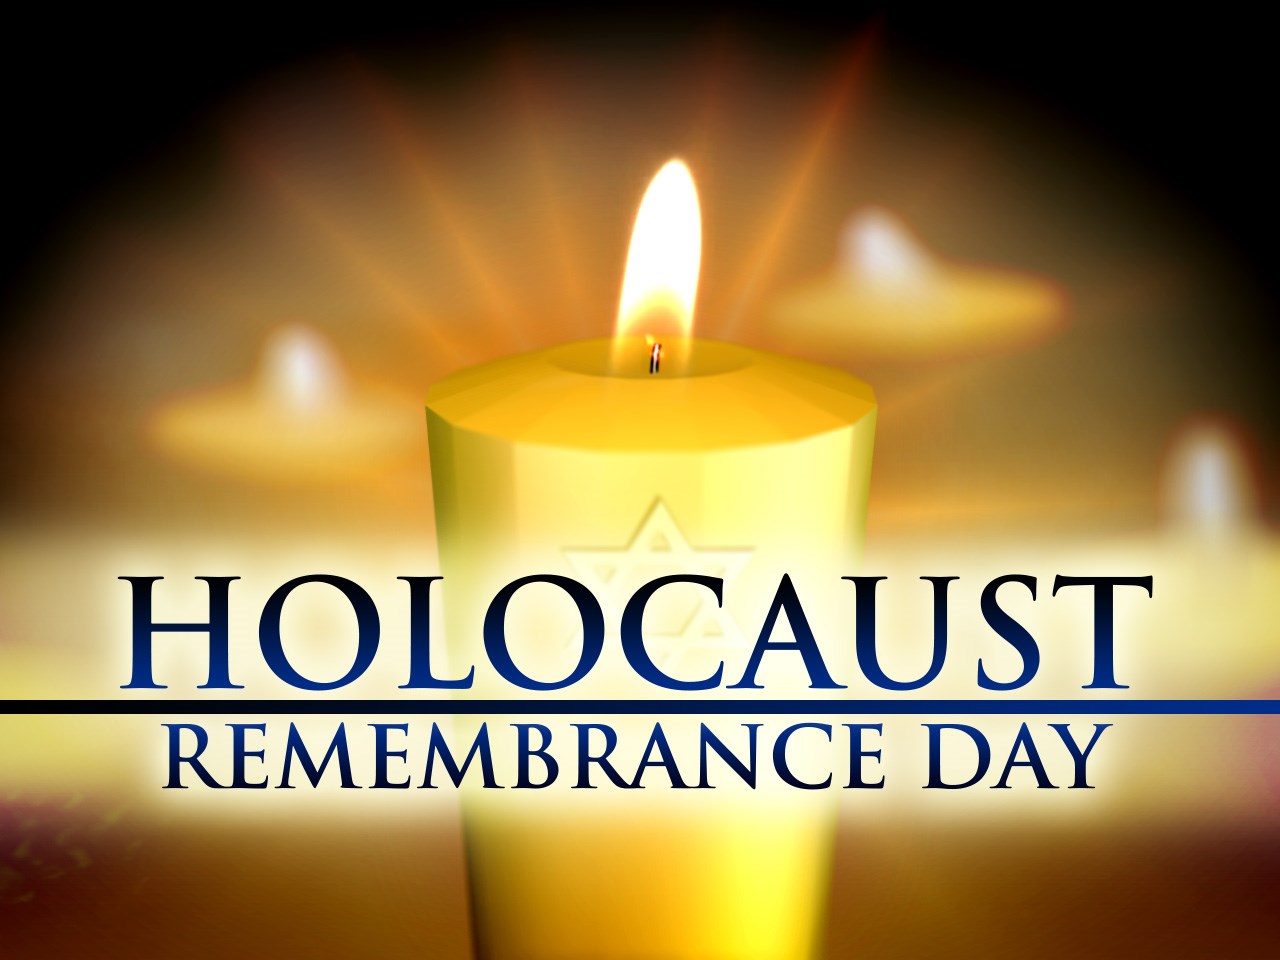 Israel marks Holocaust Remembrance Day with solemn ceremony ABC 36 News